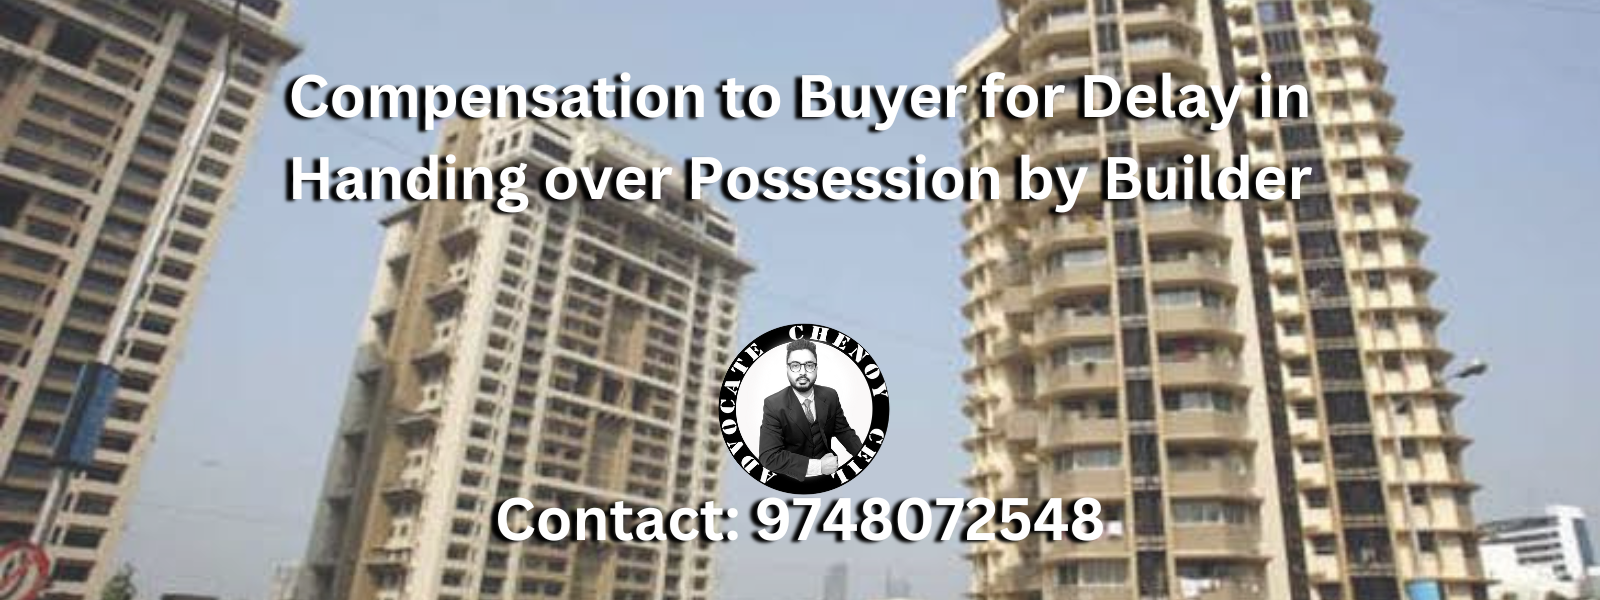 Compensation to Buyer for Delay in Handing Over Possession